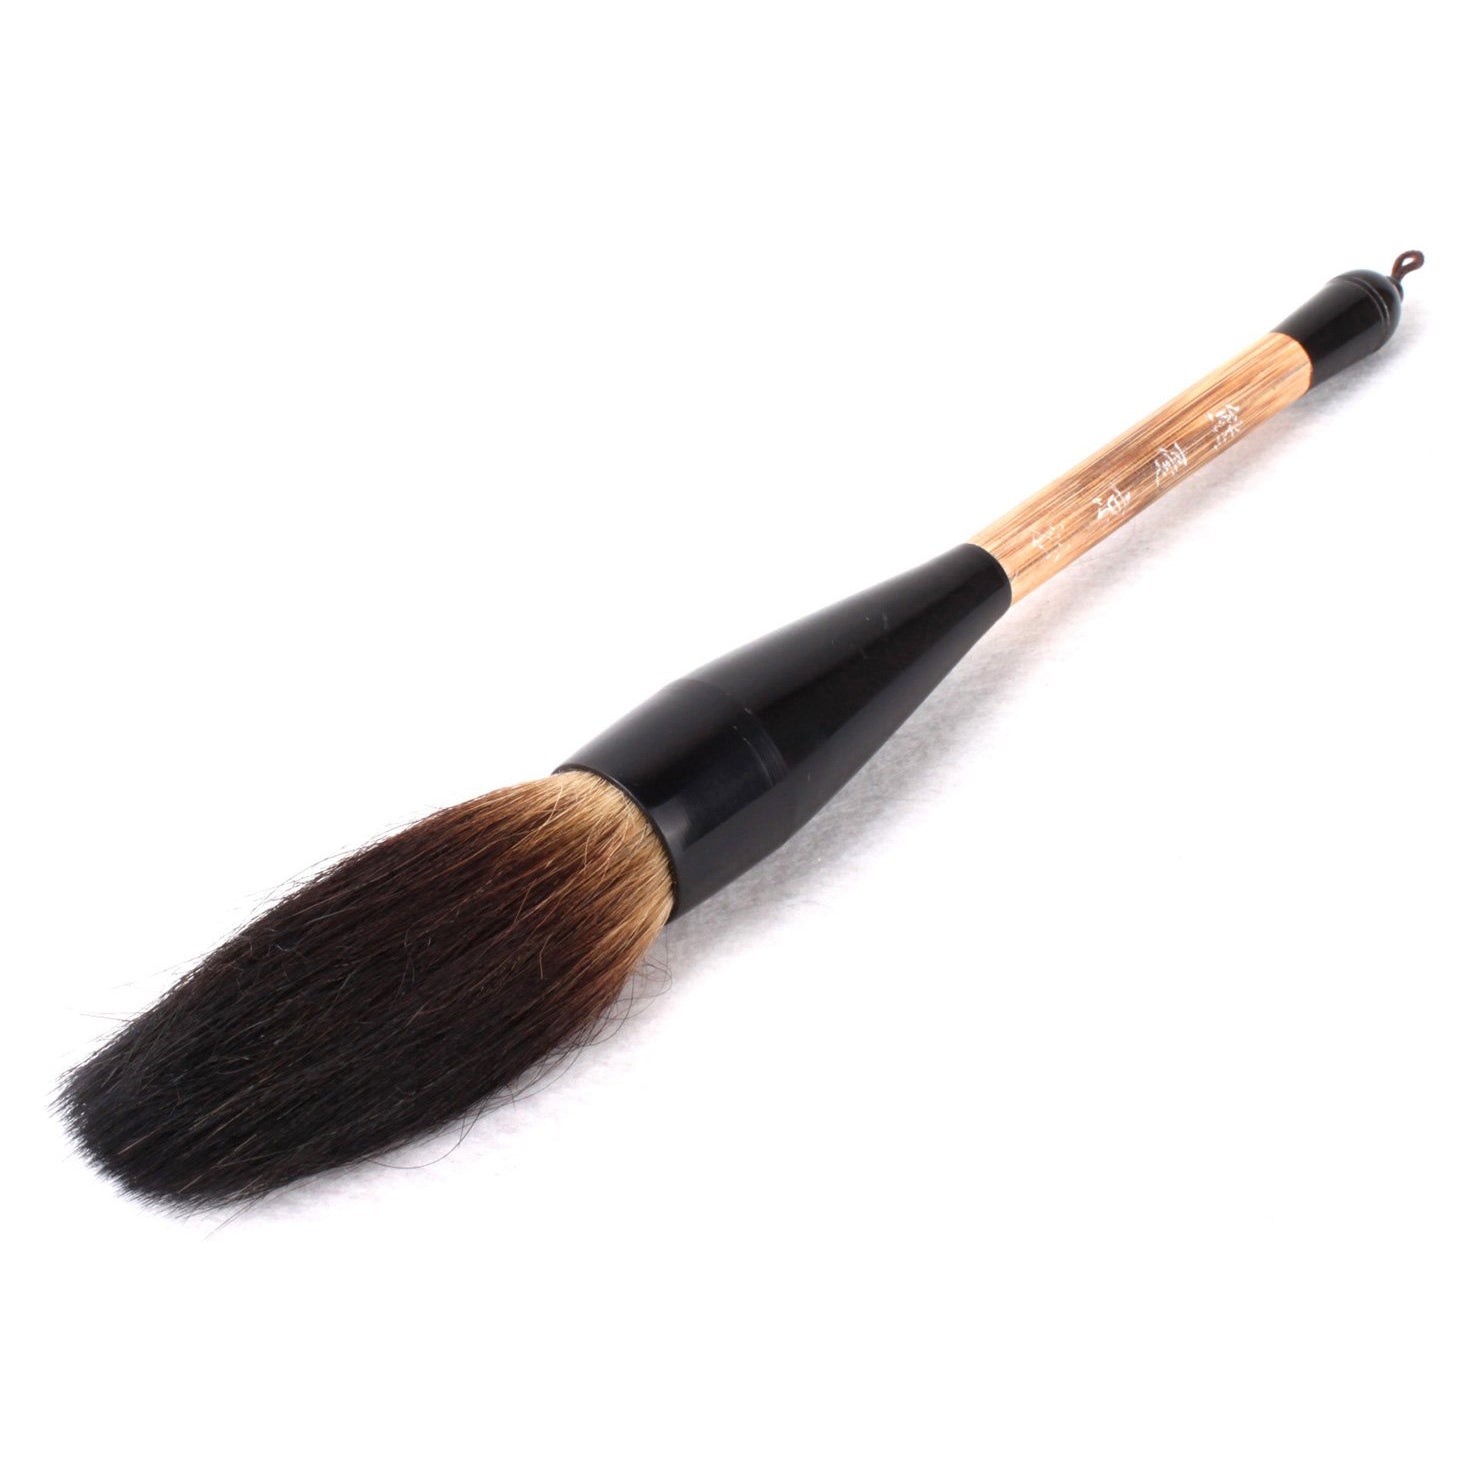 THE BEAR KING - Chinese Calligraphy & Sumi Brush - 2.8 inch Black Tip